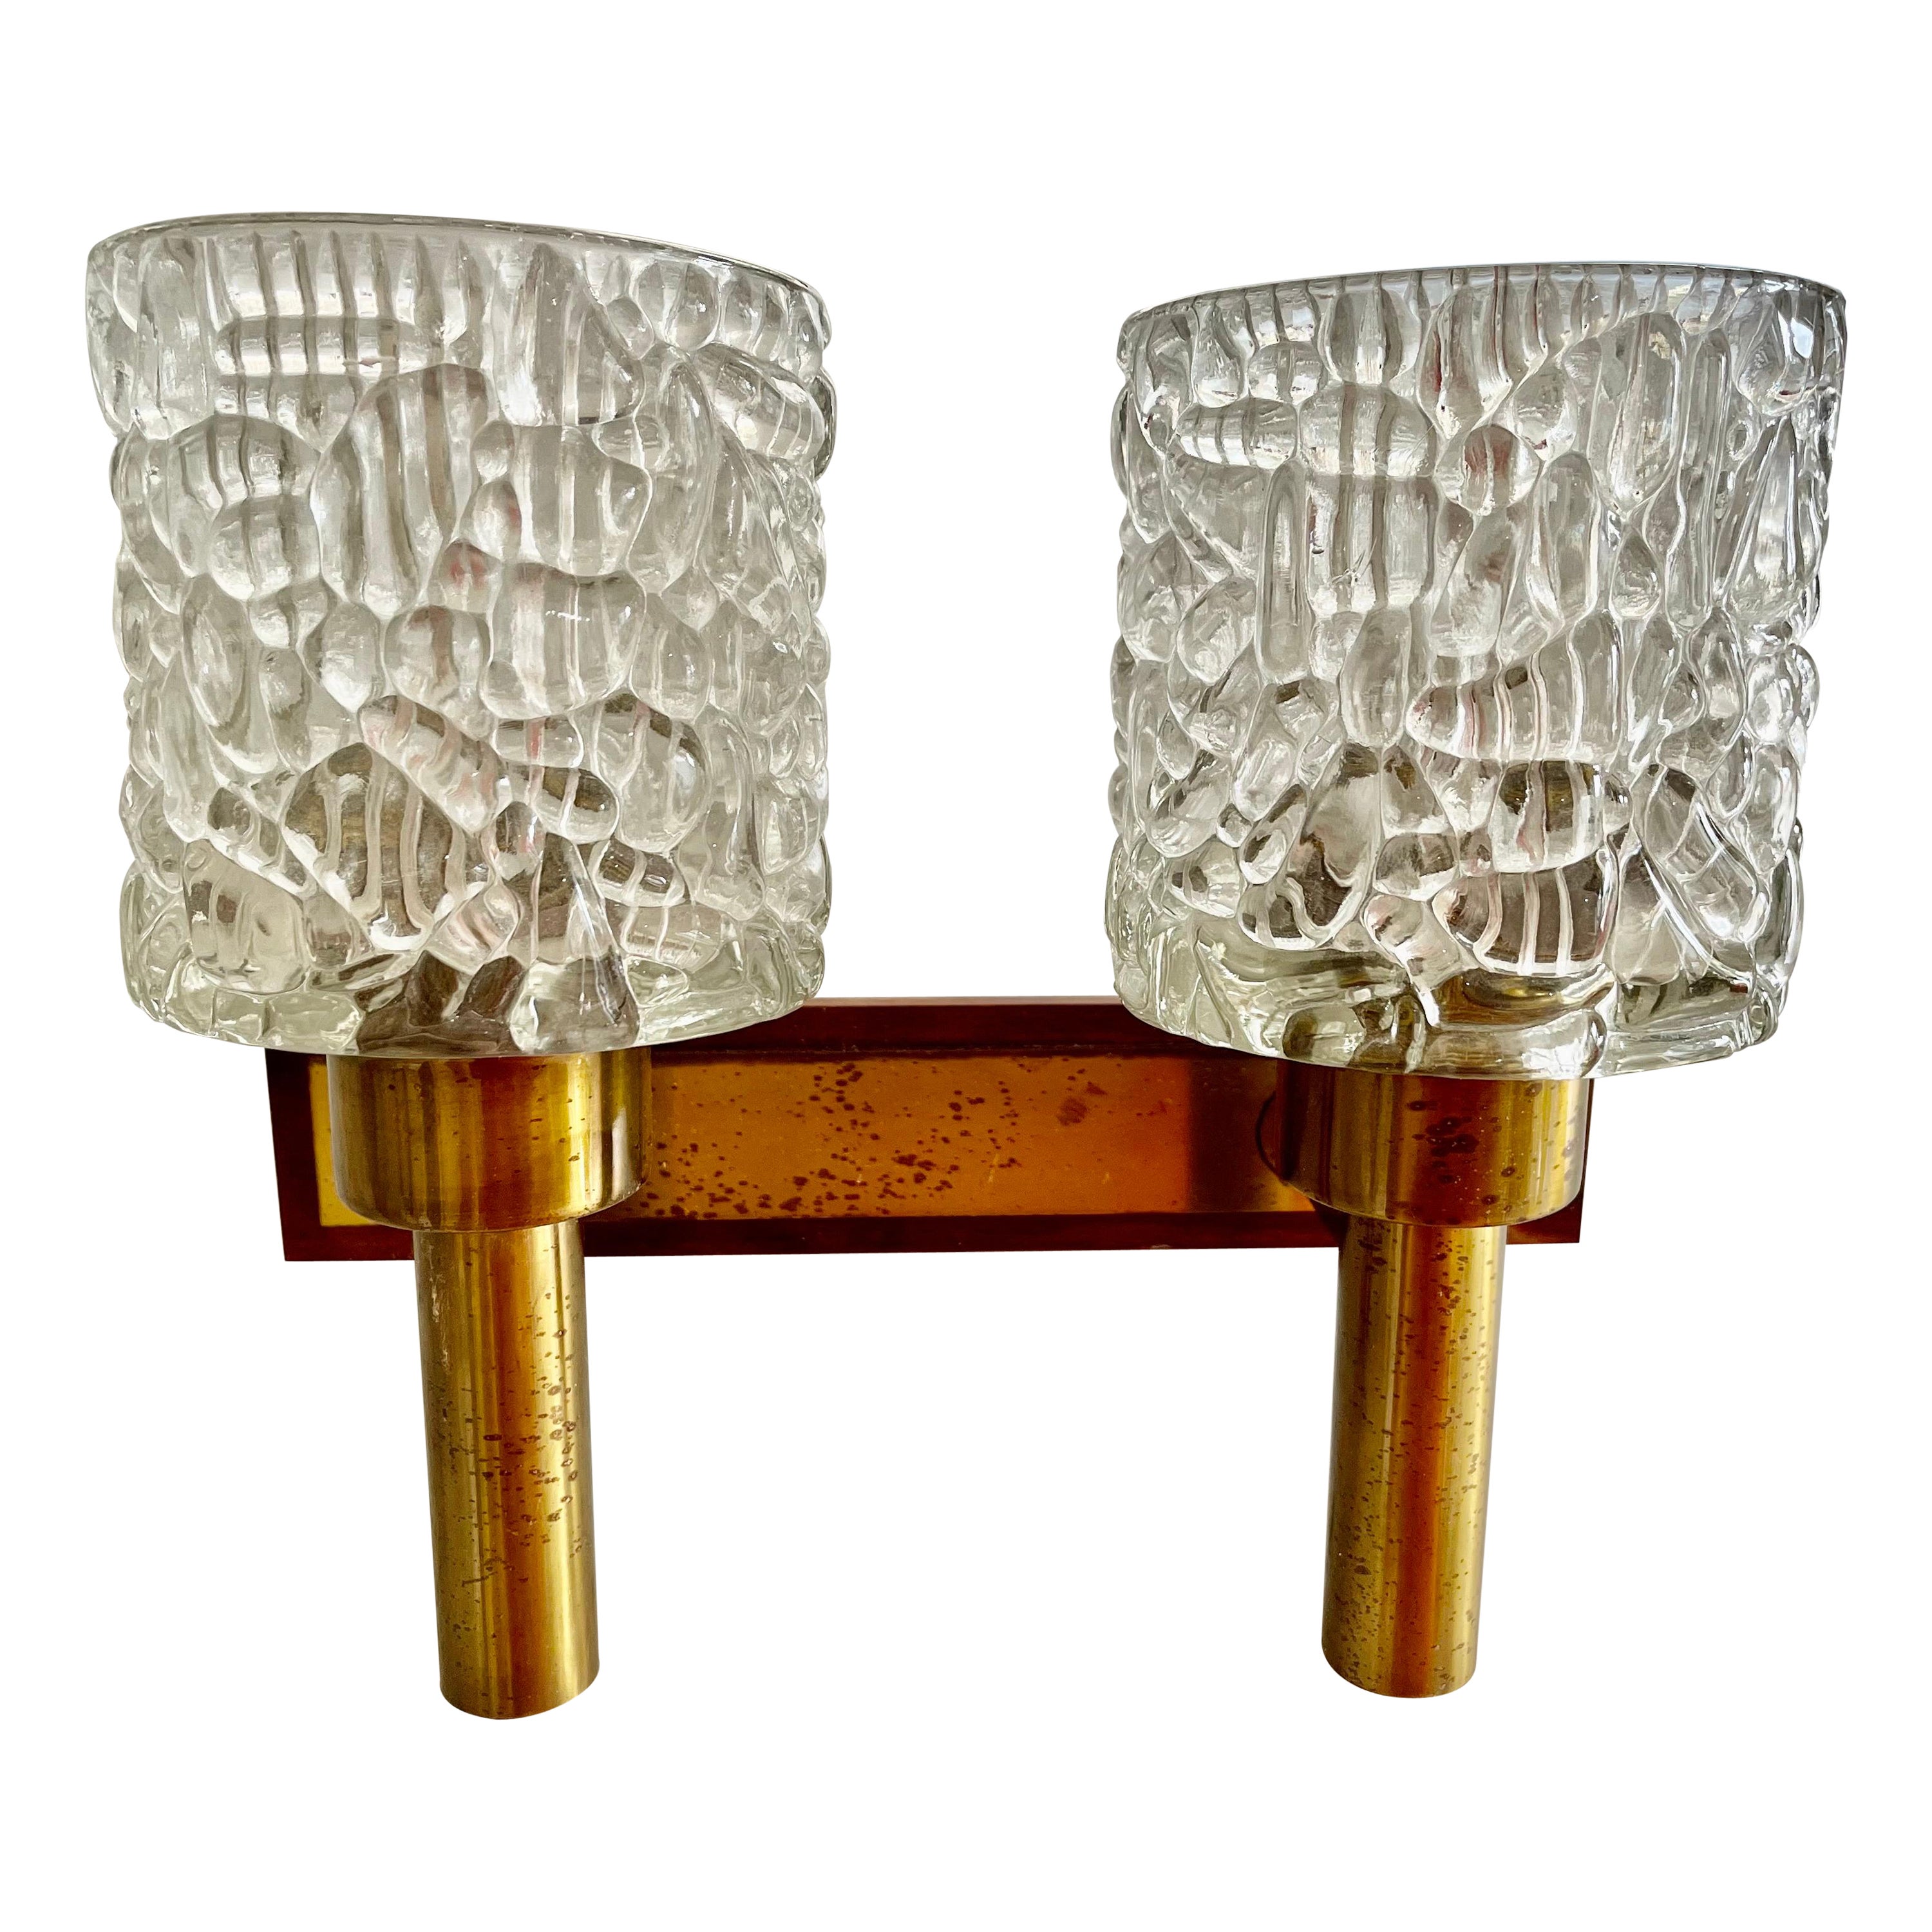 Carl Fagerlund by Orrifors wall lighting with Teak original, Sweden 1960 For Sale